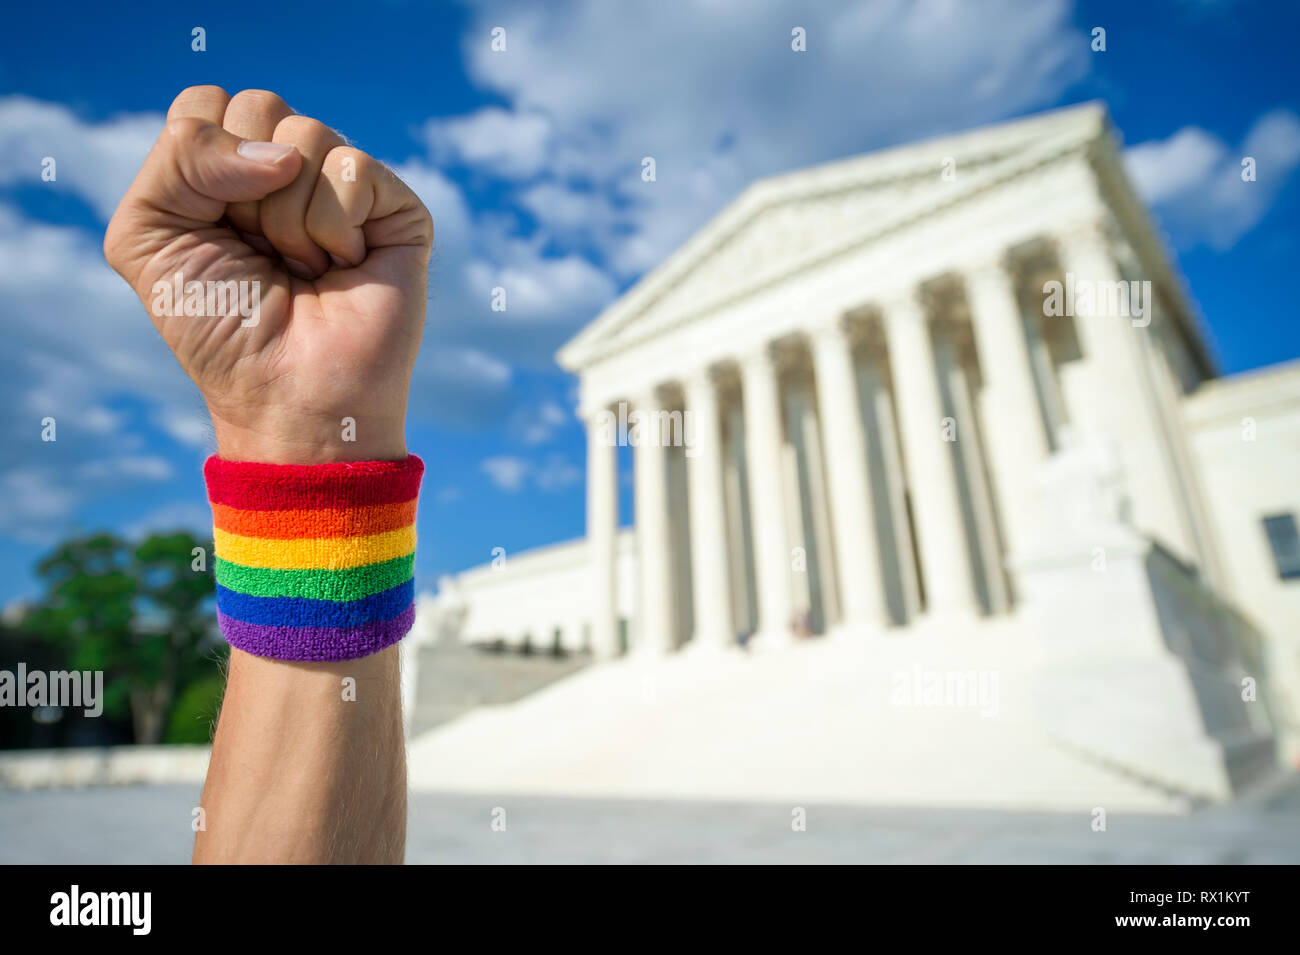 Hand wearing gay pride rainbow wristband making a power fist gesture outside the Supreme Court building in Washington, DC, USA Stock Photo